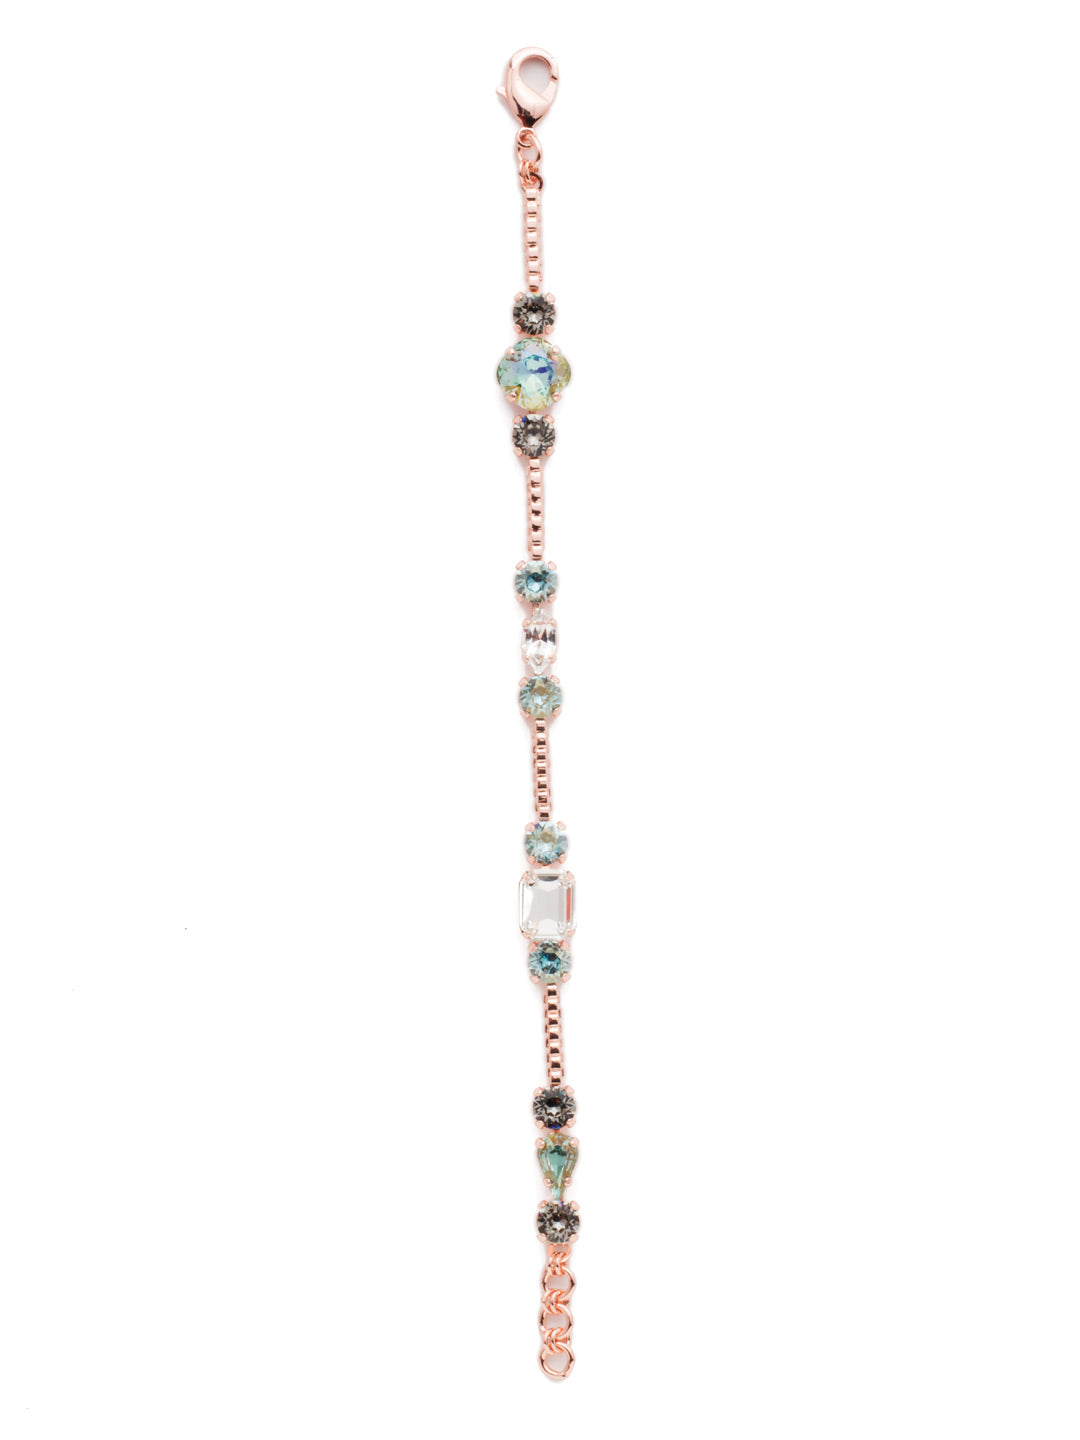 Natalie Tennis Bracelet - BEN18RGCAZ - The Natalie Tennis Bracelet is sophisticated glam wrapped around your wrist. The delicate metal base showcases elegant baquette-shaped stones and other crystal adornments that prove simplicity is stylish. From Sorrelli's Crystal Azure collection in our Rose Gold-tone finish.